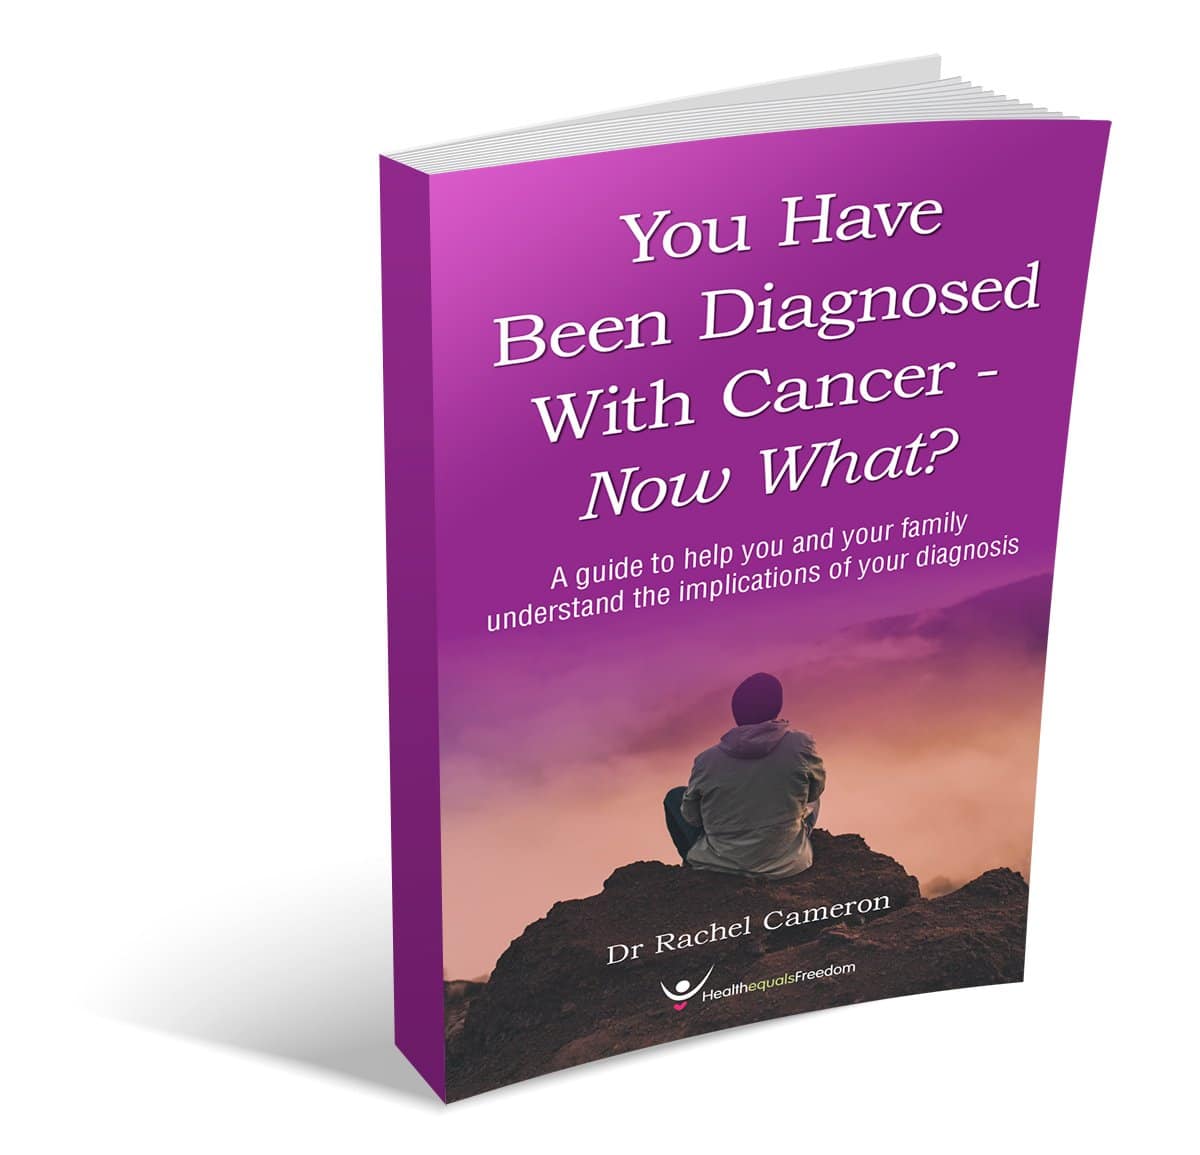 You have been diagnosed with Cancer - Now What? Dr Rachel Cameron ebook